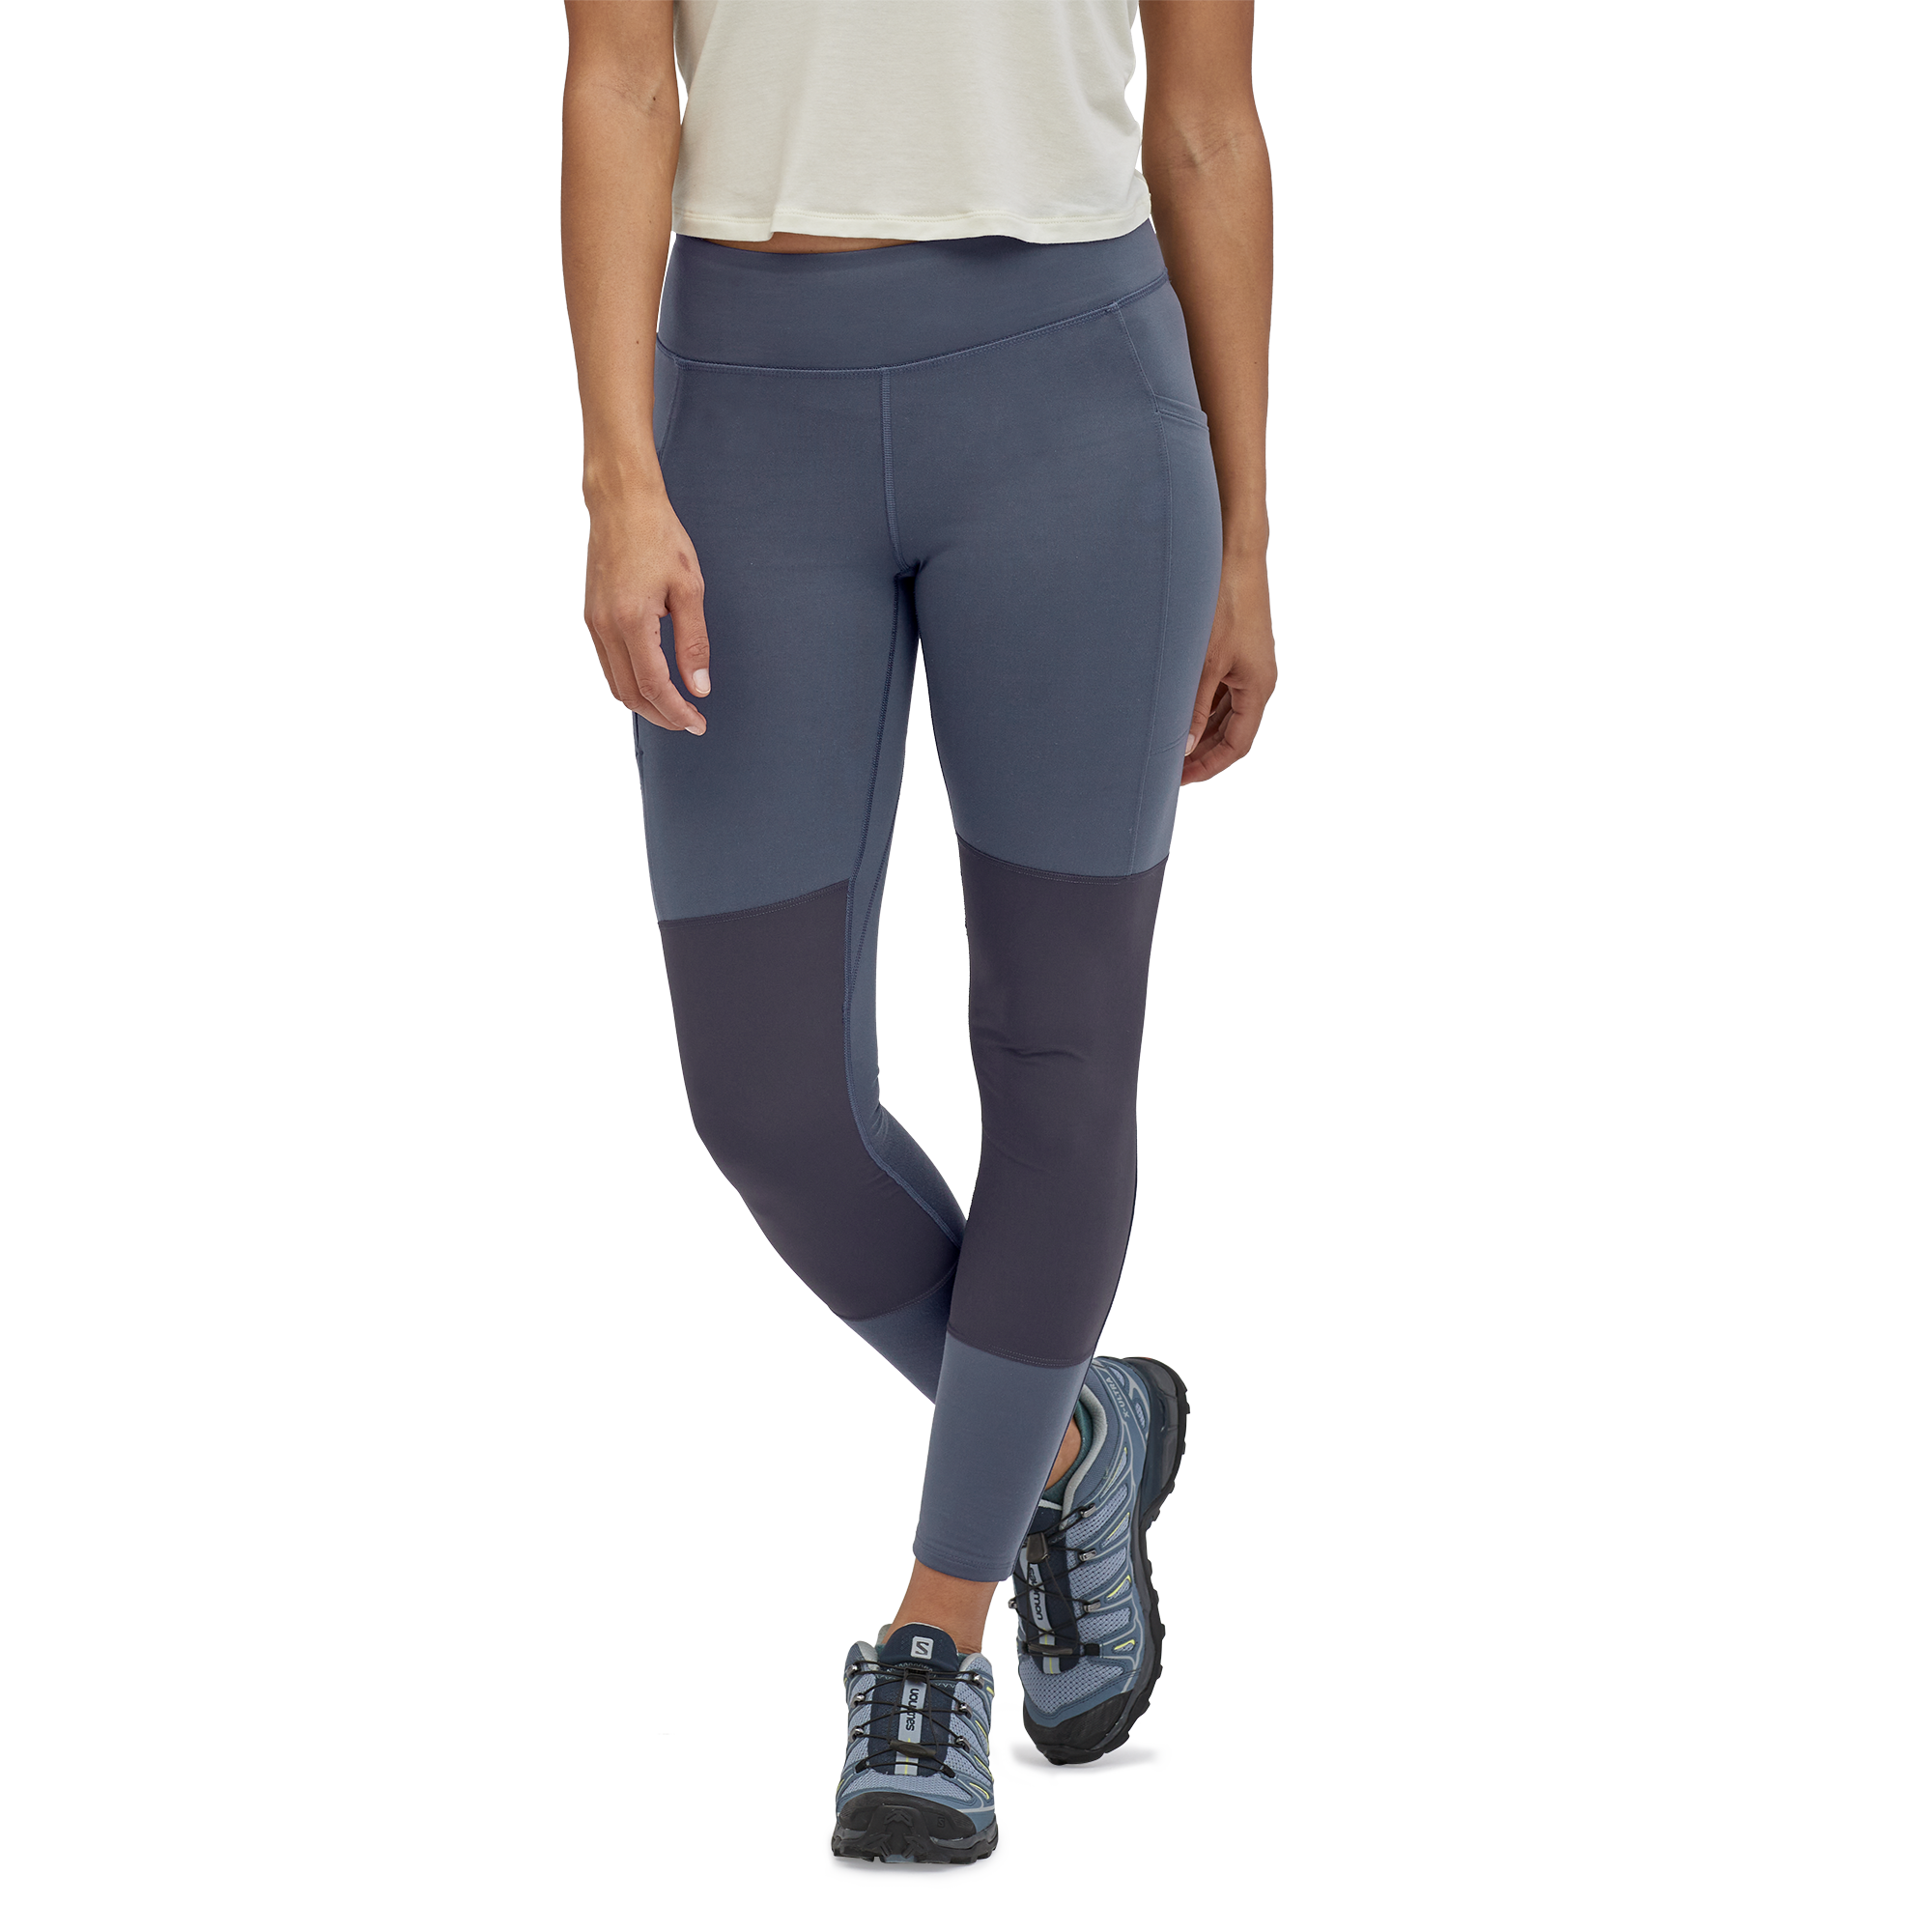 Patagonia Women's Pack Out Hiking Tights